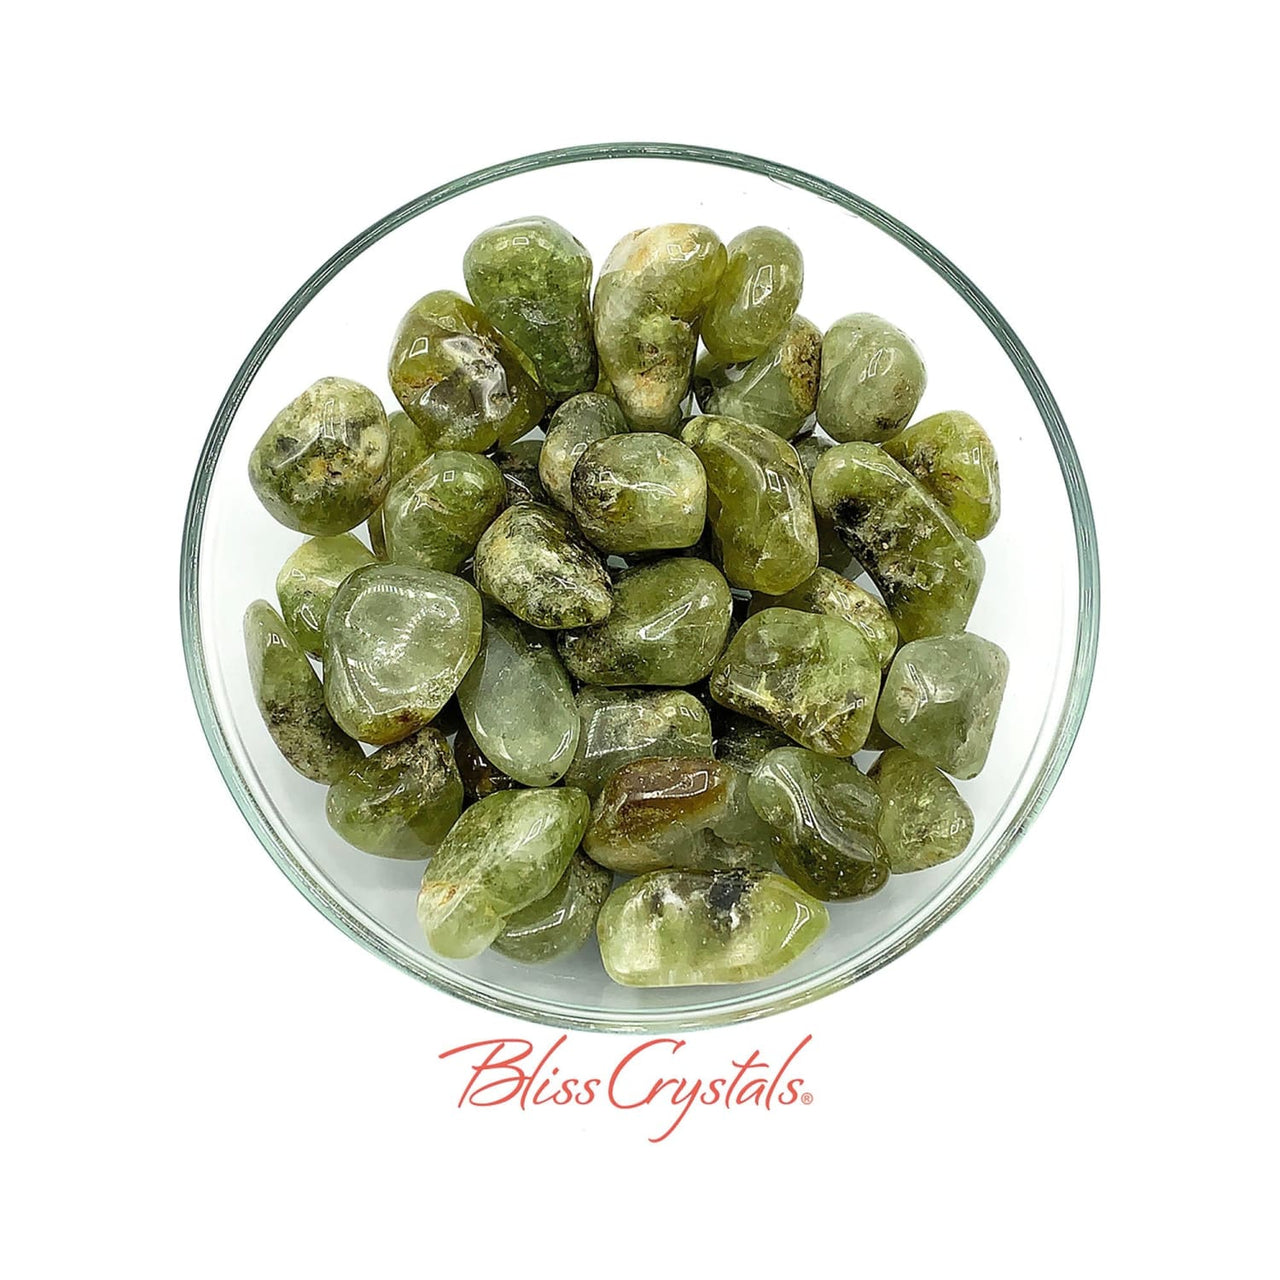 1 Green Garnet Tumbled Stone Healing Crystal and Stone for 